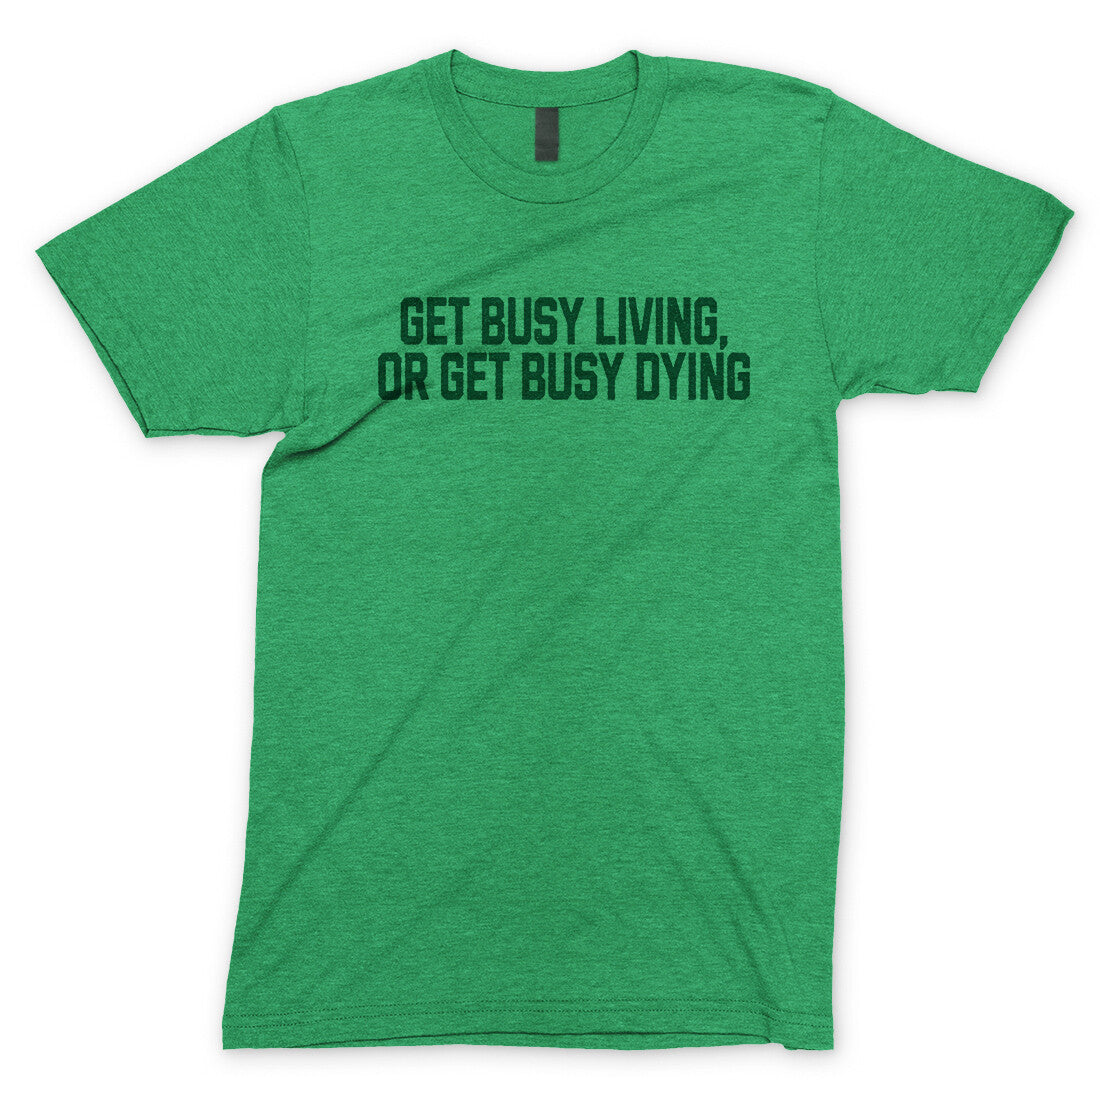 Get Busy Living or Get Busy Dying in Heather Irish Green Color